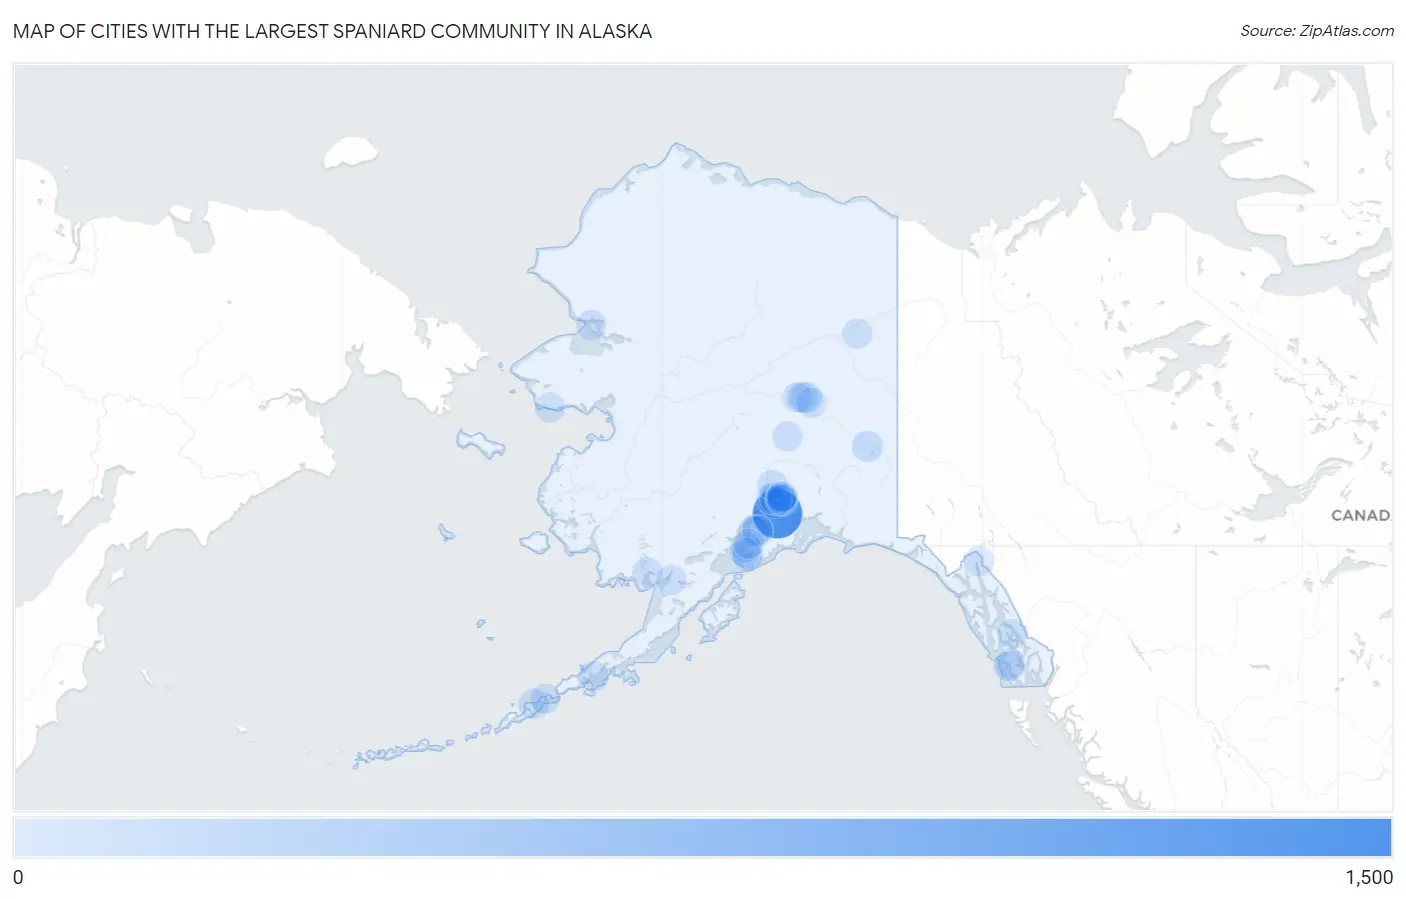 Cities with the Largest Spaniard Community in Alaska Map